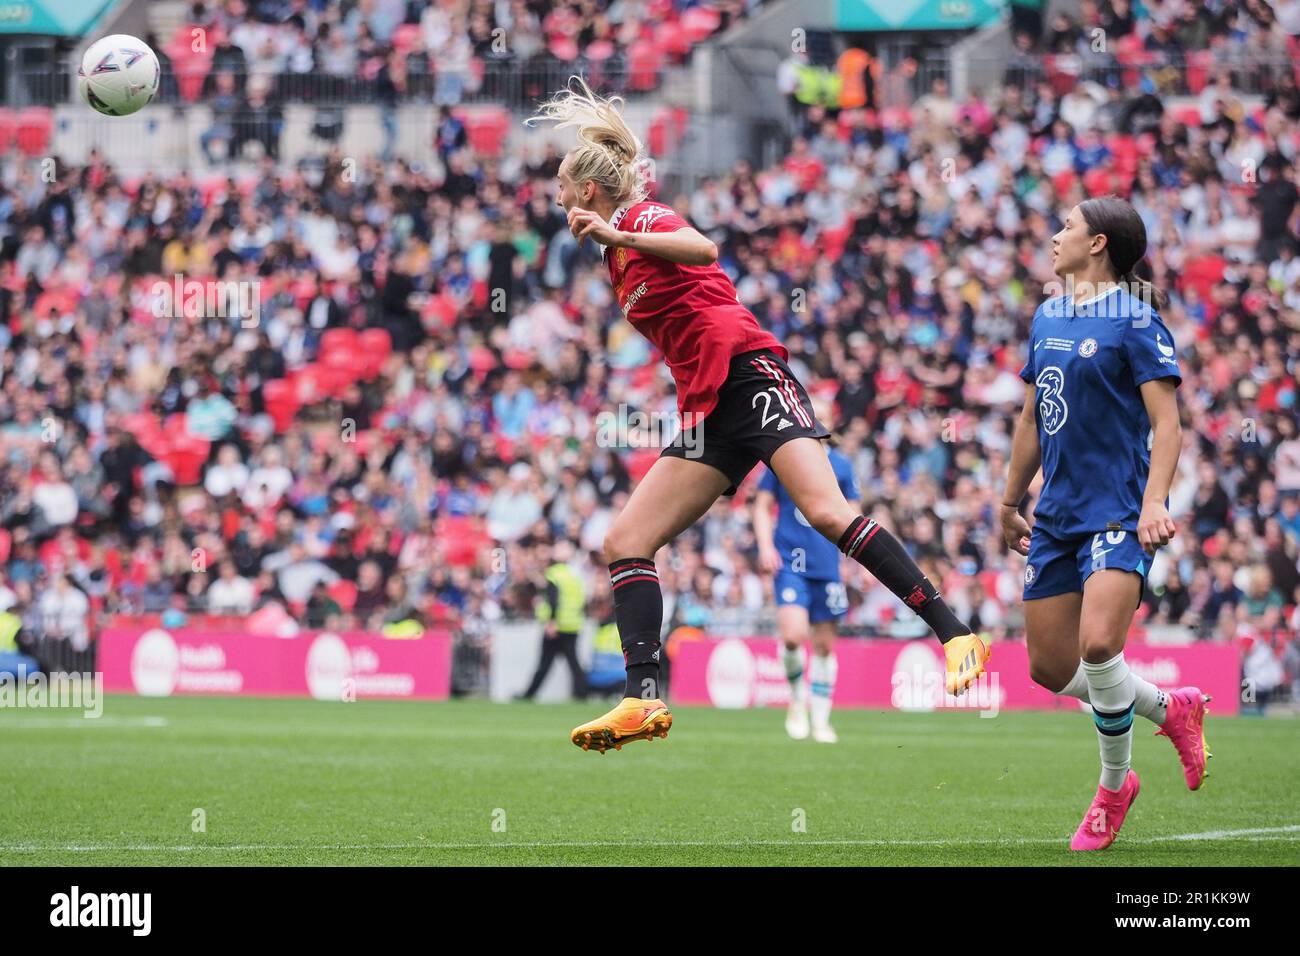 London, UK. 14th May, 2023. Millie Turner (21 Manchester United) heads the ball clear during the Vitality Womens FA Cup final between Chelsea and Manchester United at Wembley Stadium in London, England (Natalie Mincher/SPP) Credit: SPP Sport Press Photo. /Alamy Live News Stock Photo